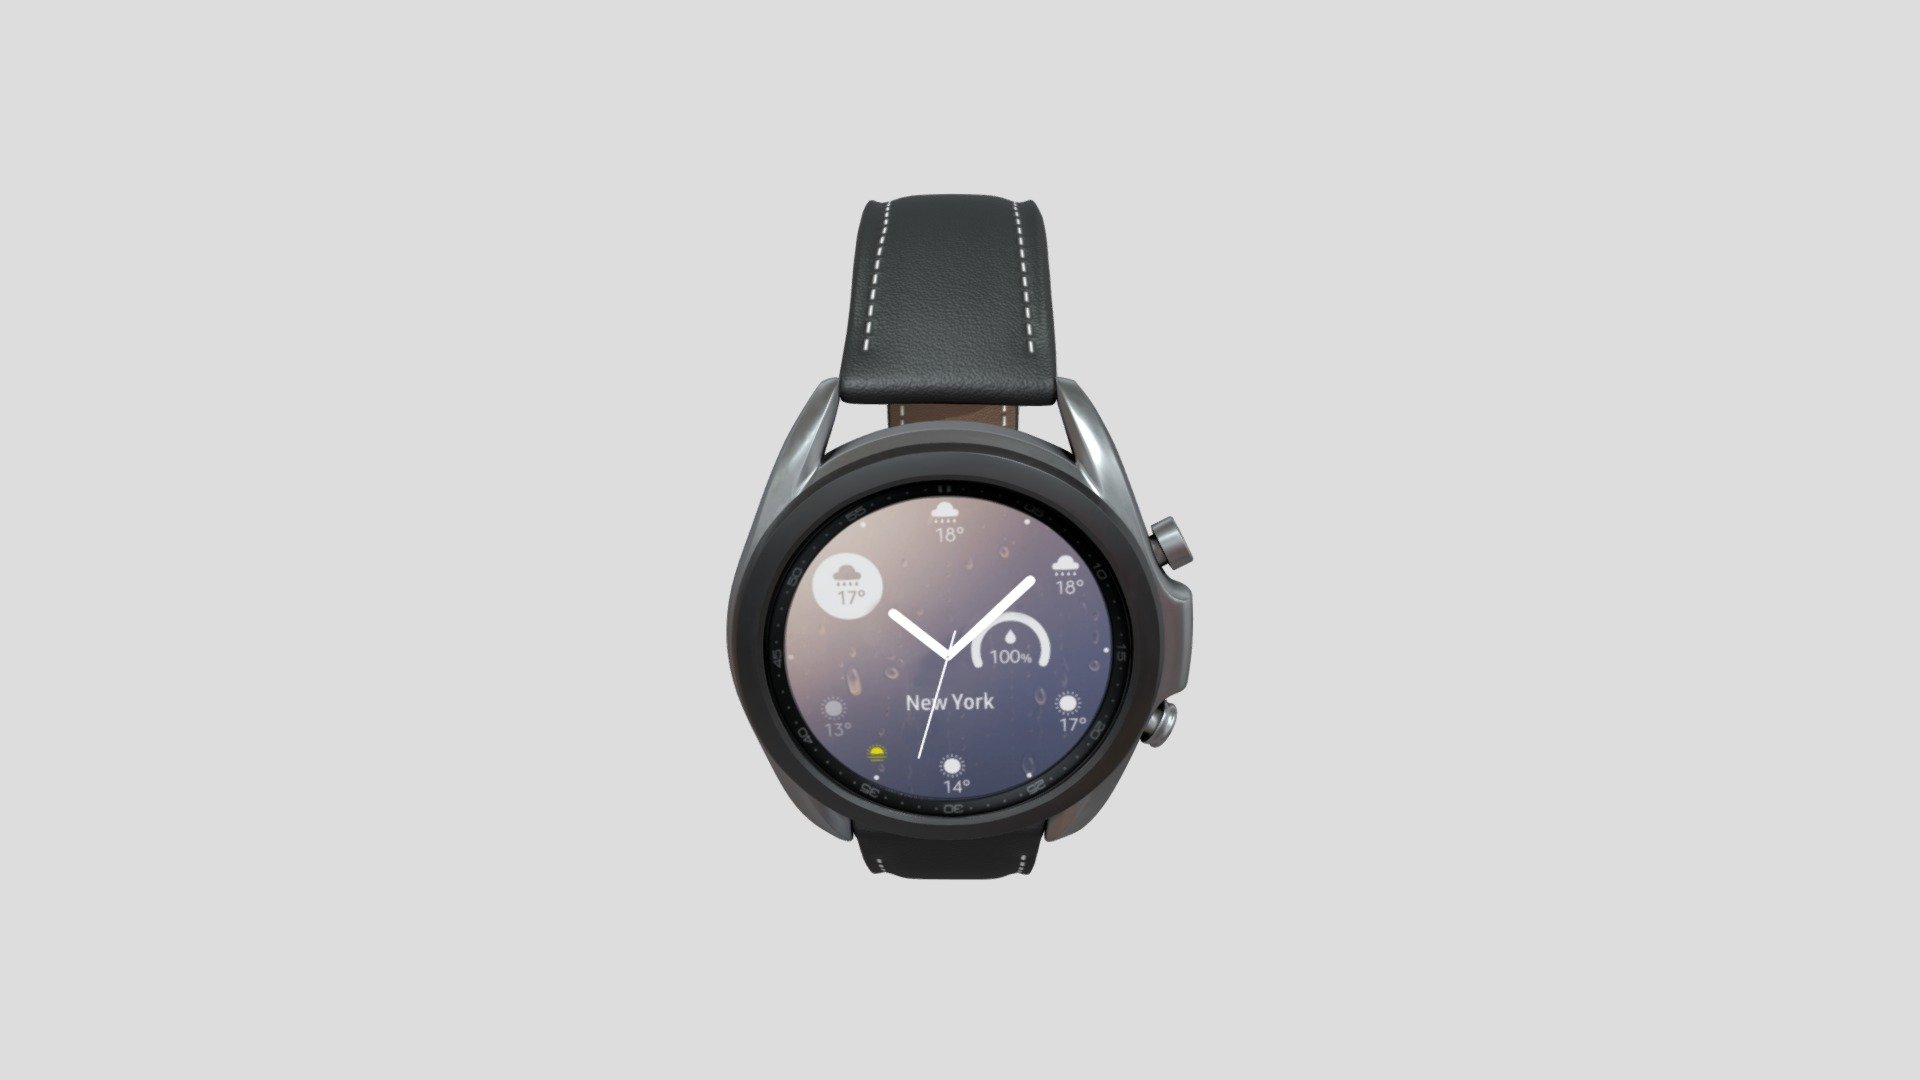 Modelled in 3ds max and textured in substance painter - Samsung Galaxy Watch 3 - 3D model by Adnan Majeed (@king.adnan09) 3d model